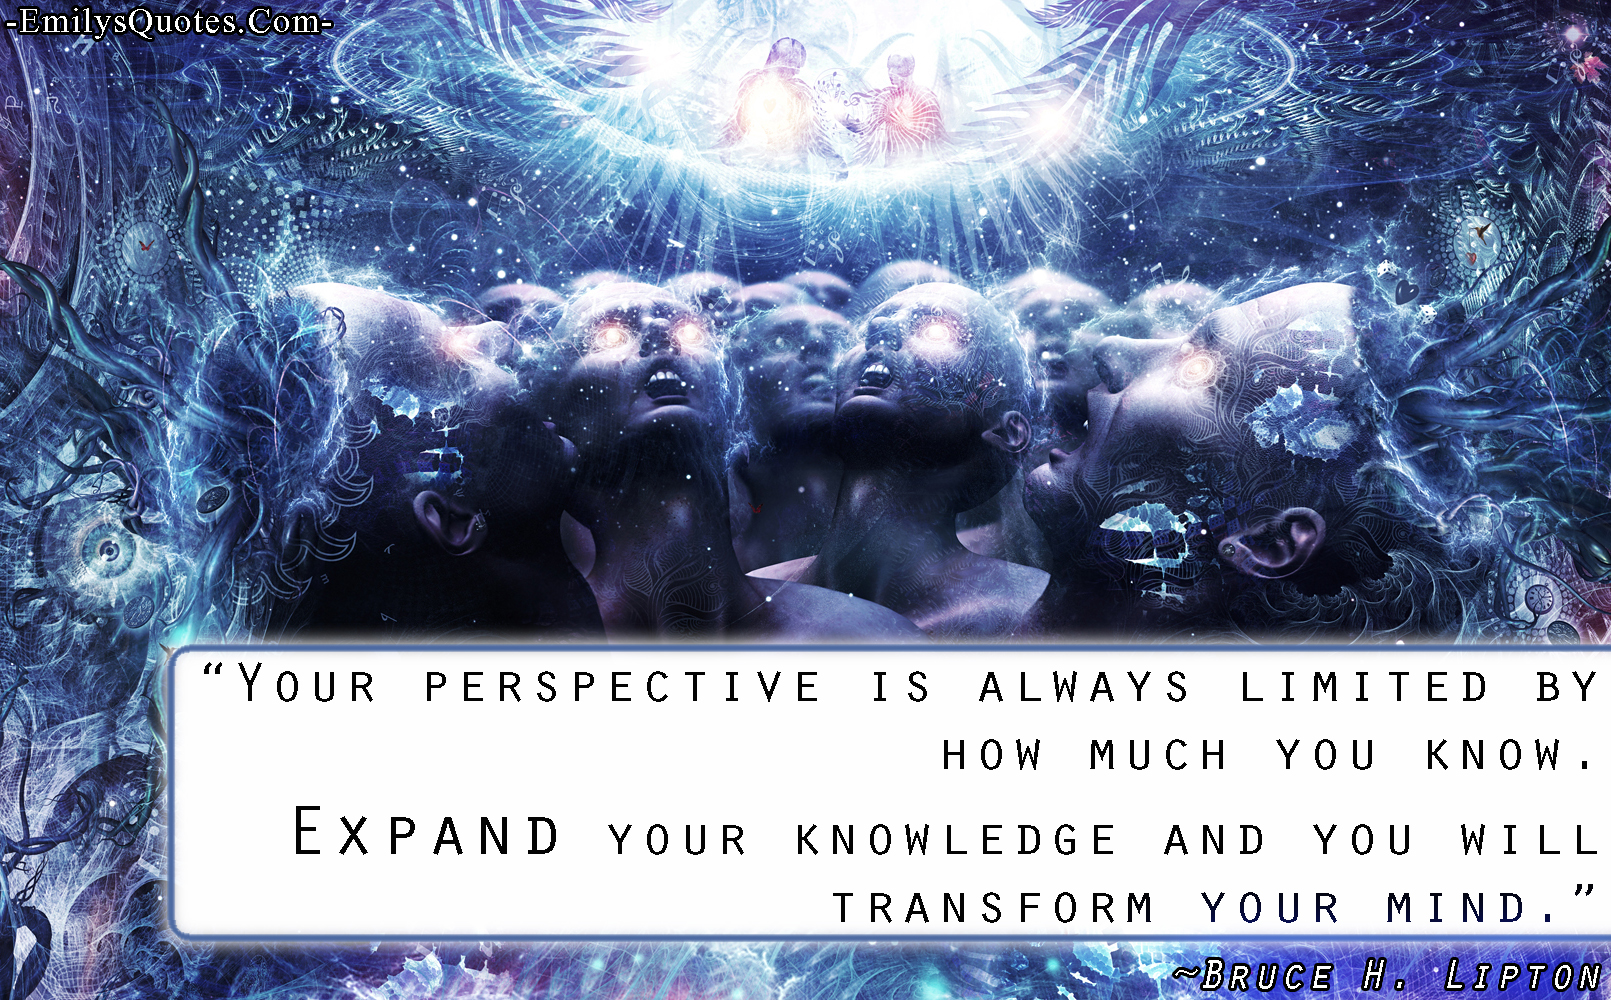 Your perspective is always limited by how much you know. Expand your knowledge and you will transform your mind